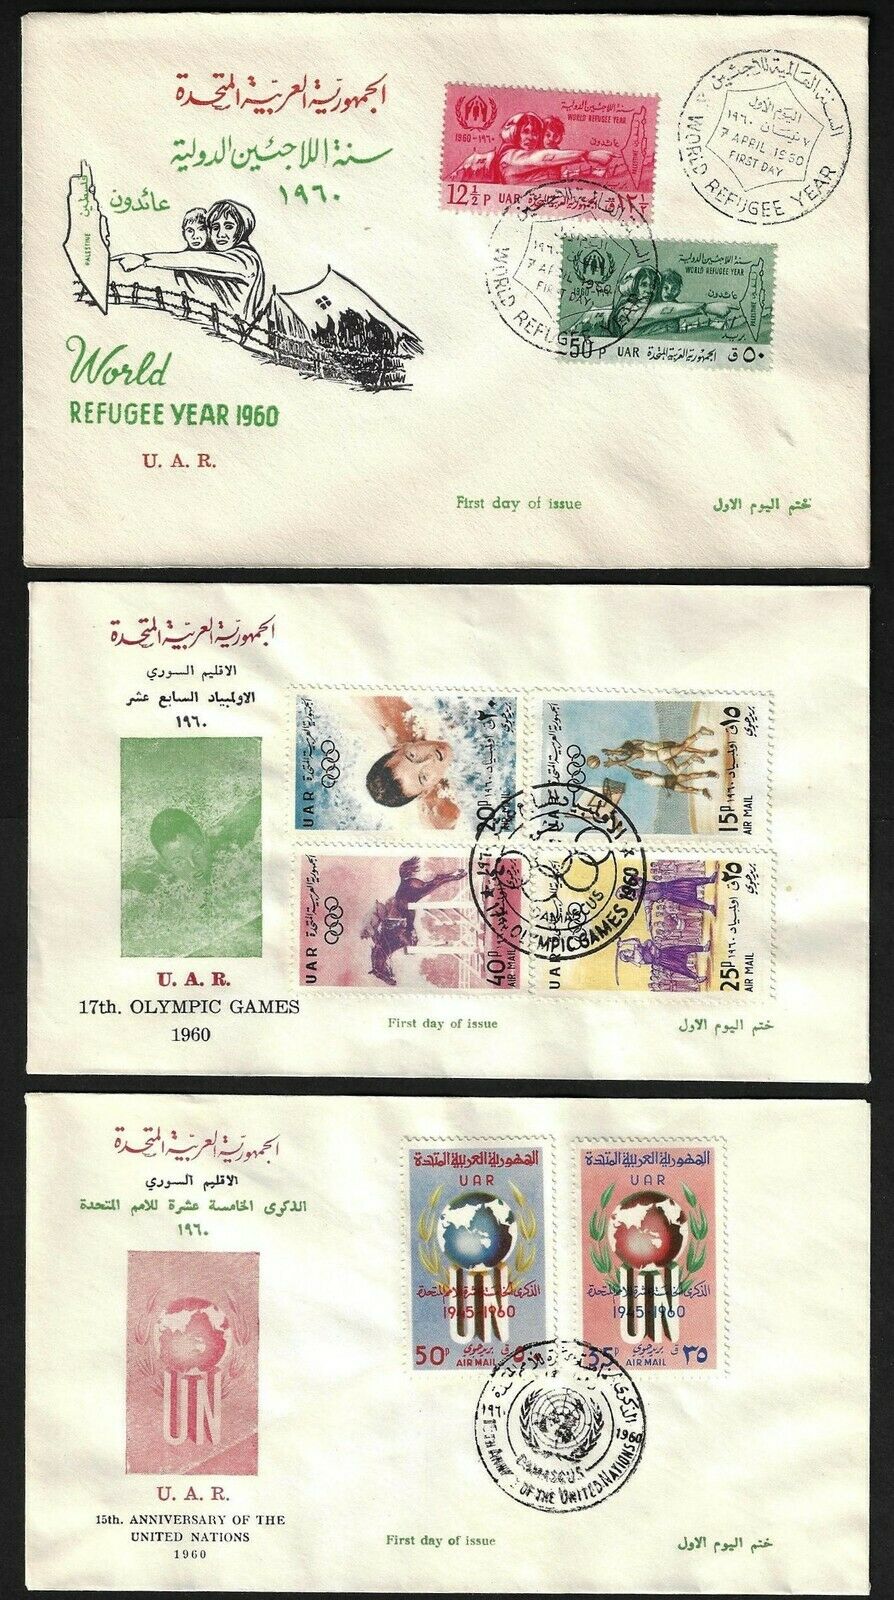 SYRIA 1960 THREE FDCs OLYMPIC GAMES UN ANNIVERSARY & REFUGEE YEAR